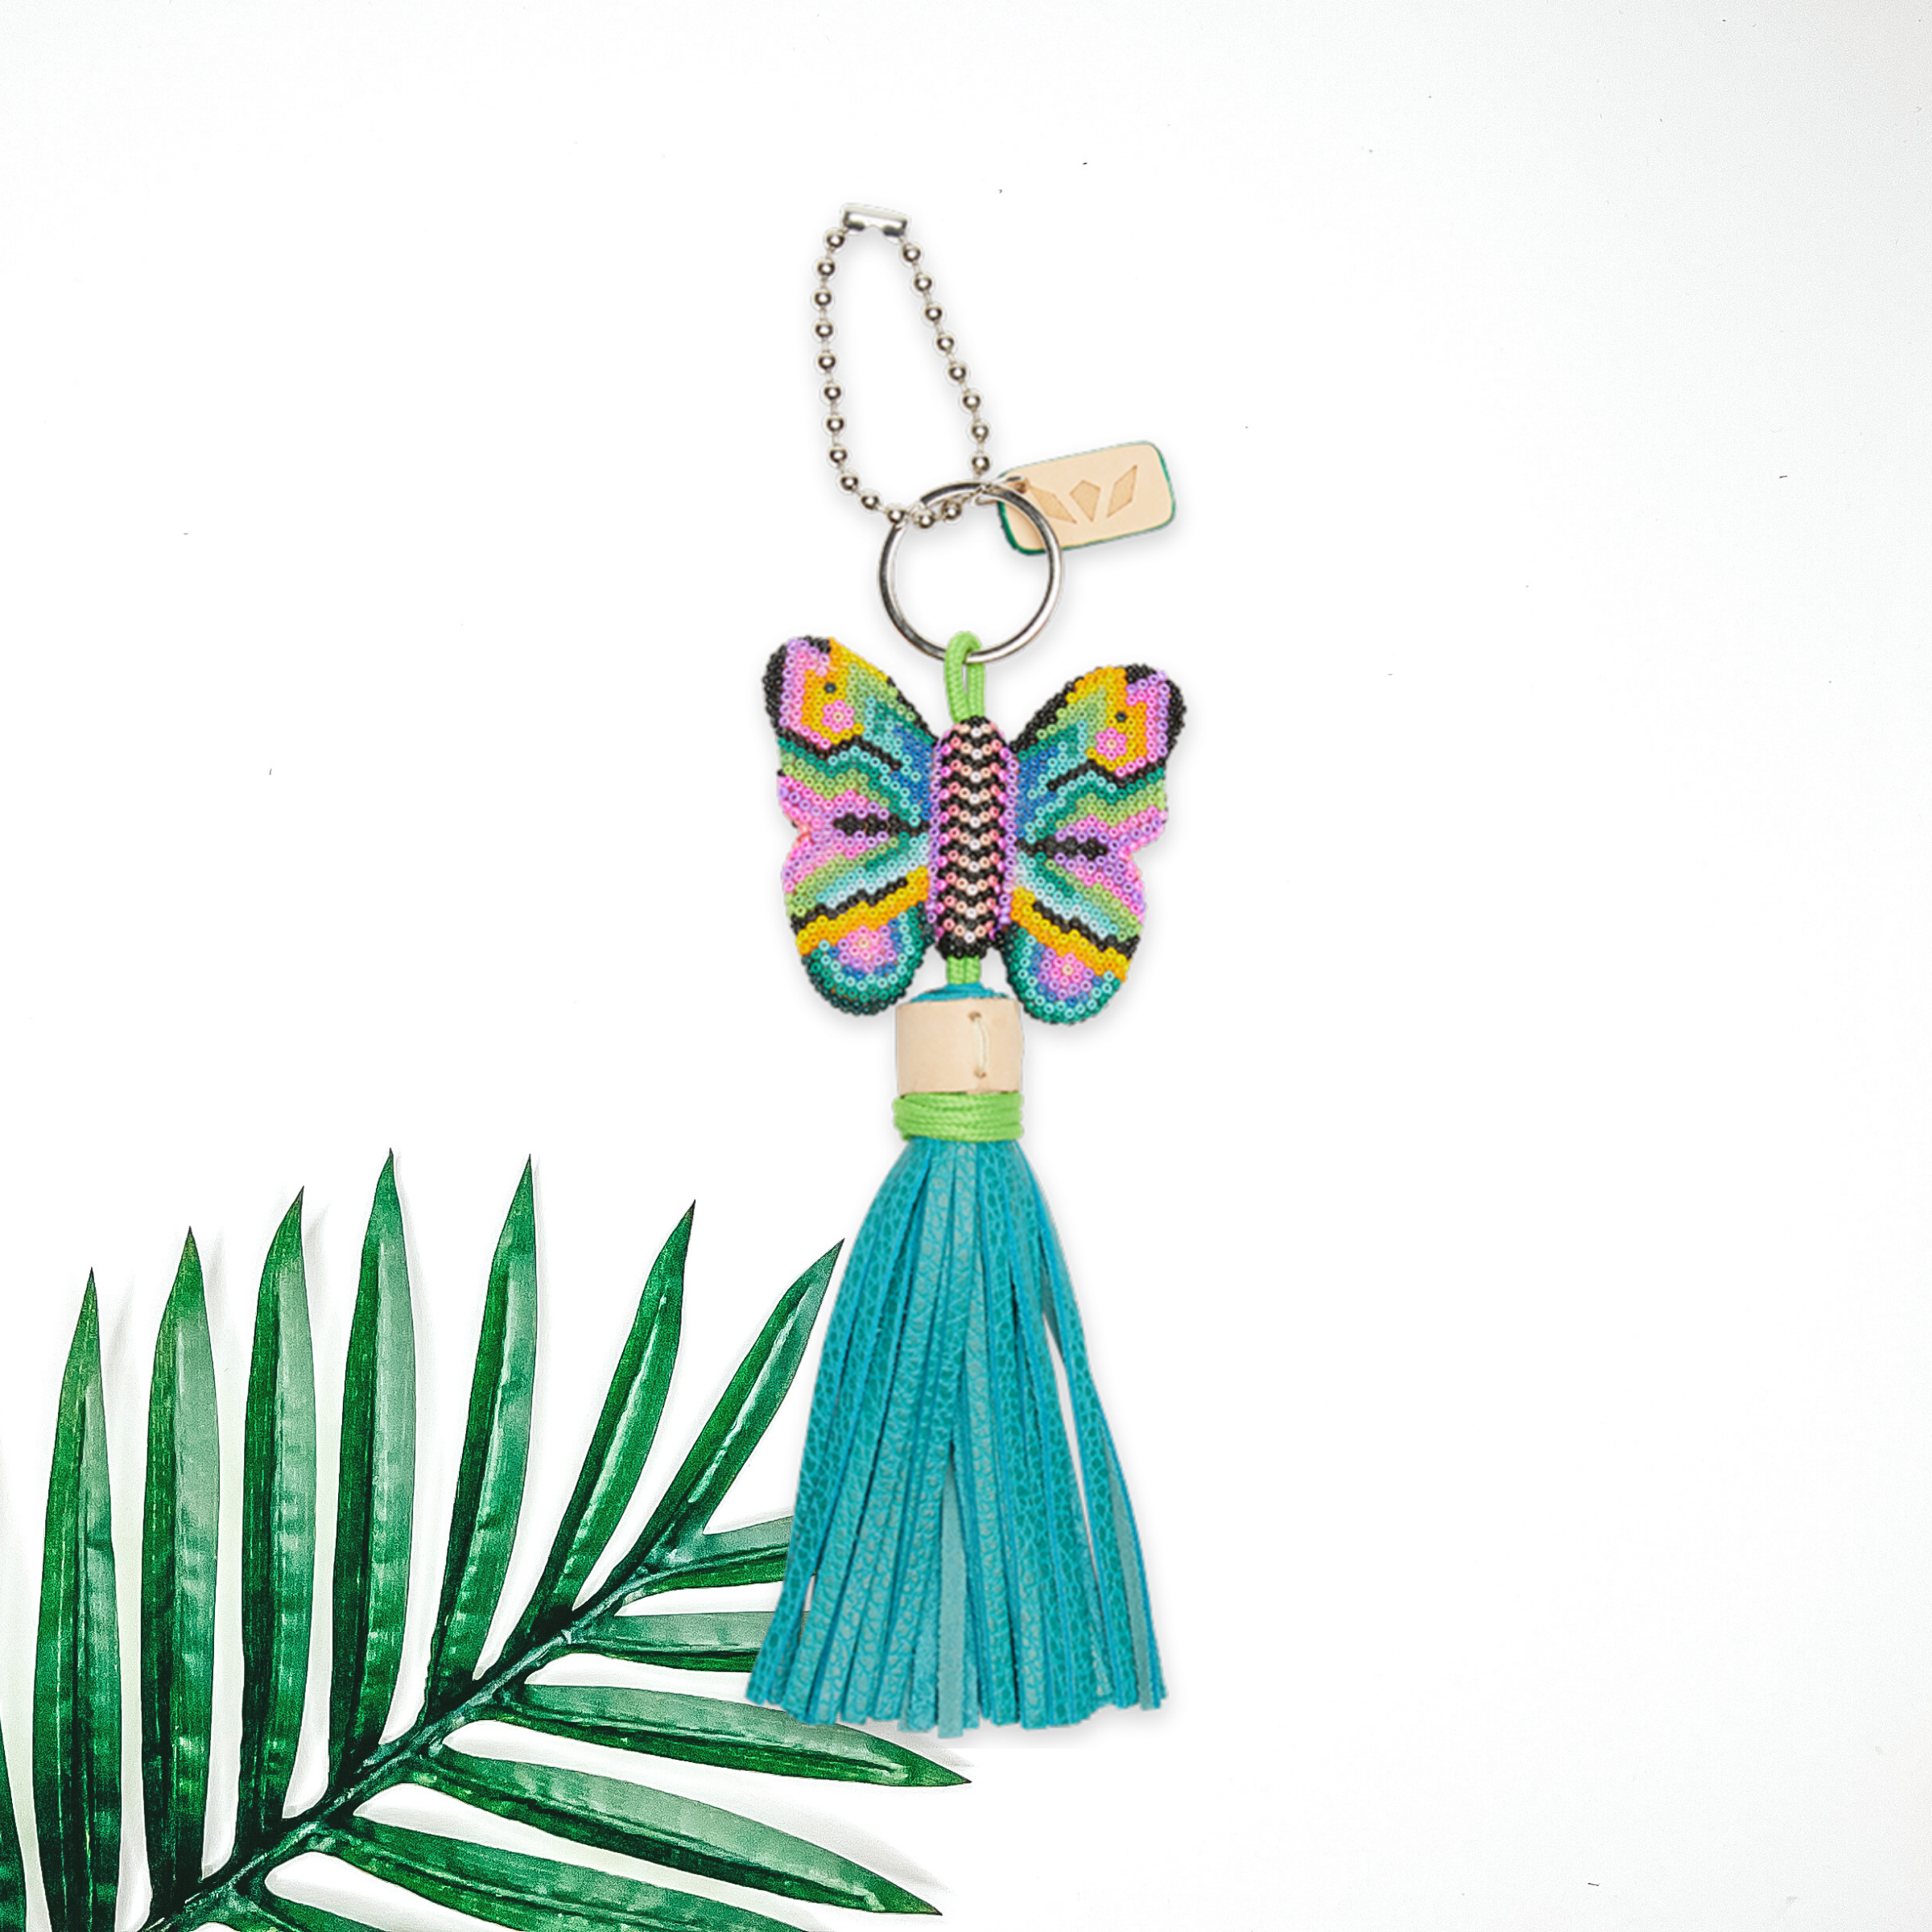 Centered in the middle of the picture is a butterfly charm with blue tassels. To the right of the charm is a palm leaf, all on a white background. 